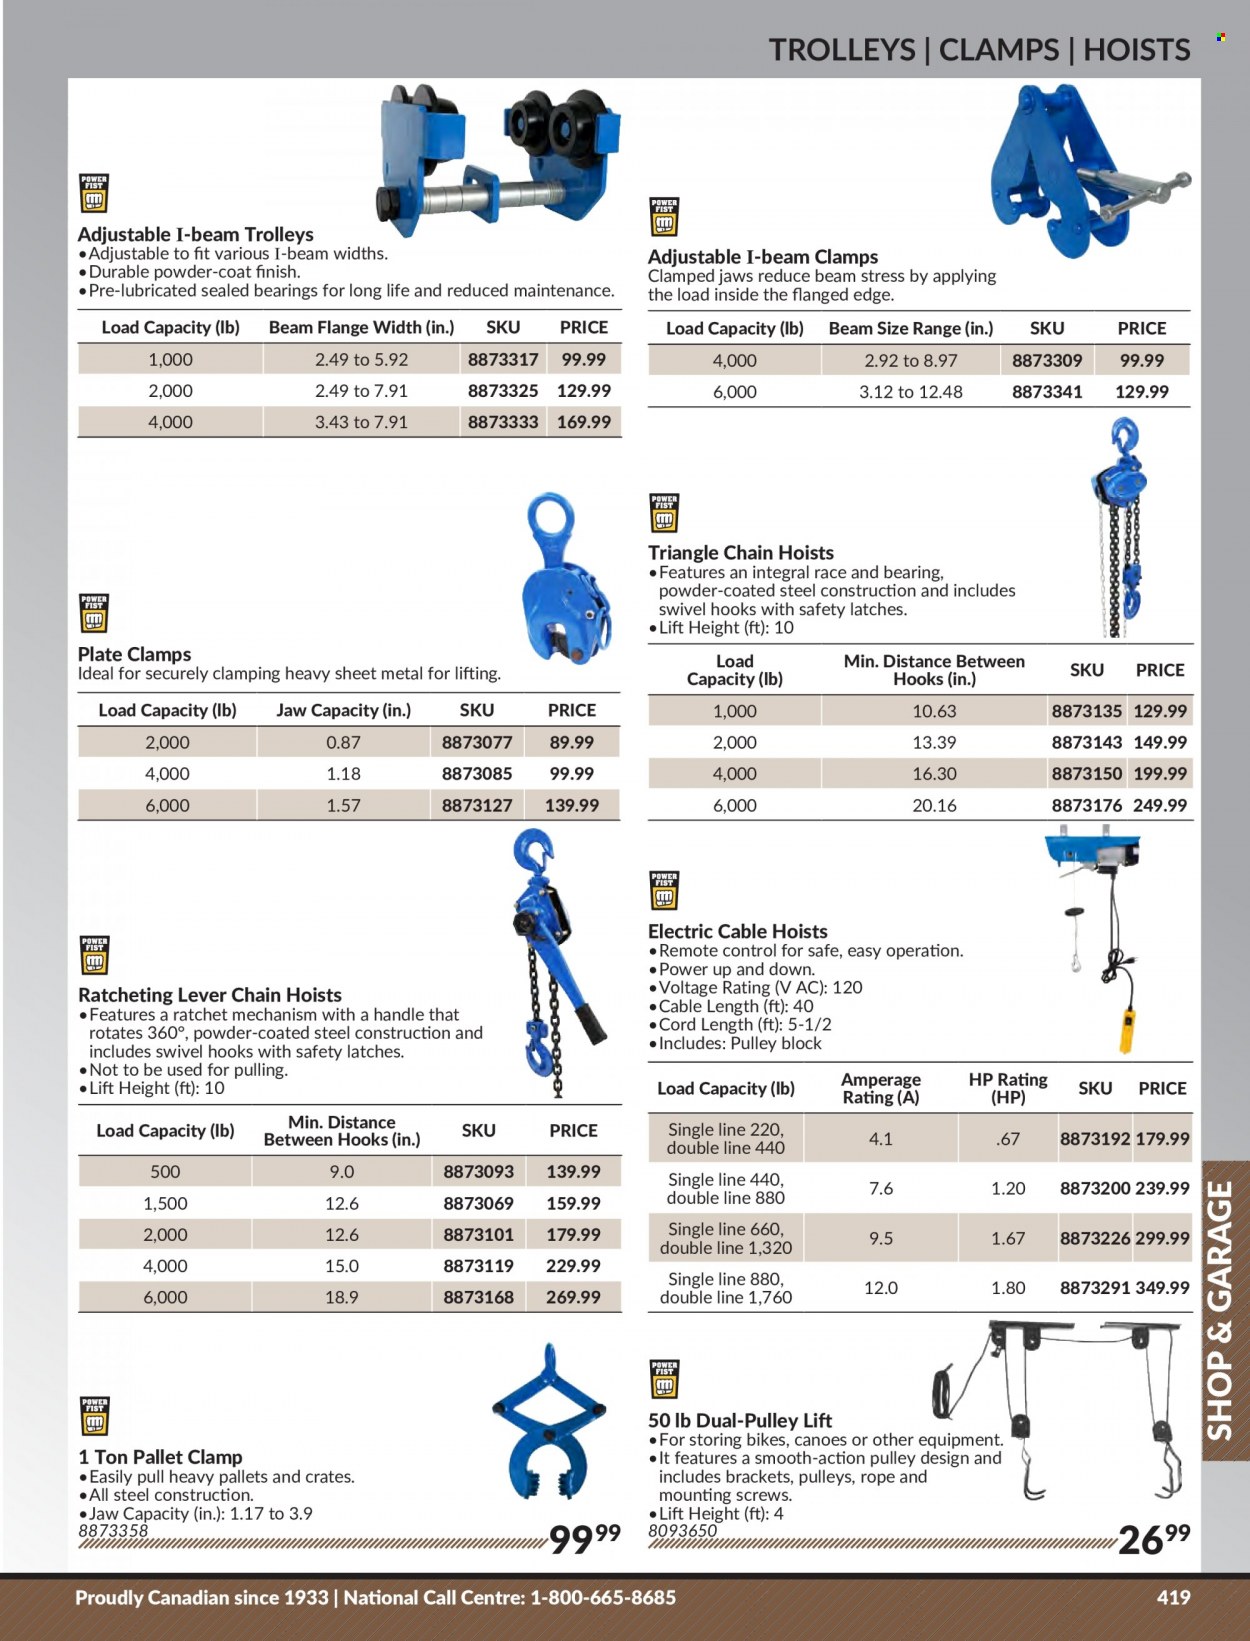 Princess Auto Flyer - Sales products - hand tools. Page 427.